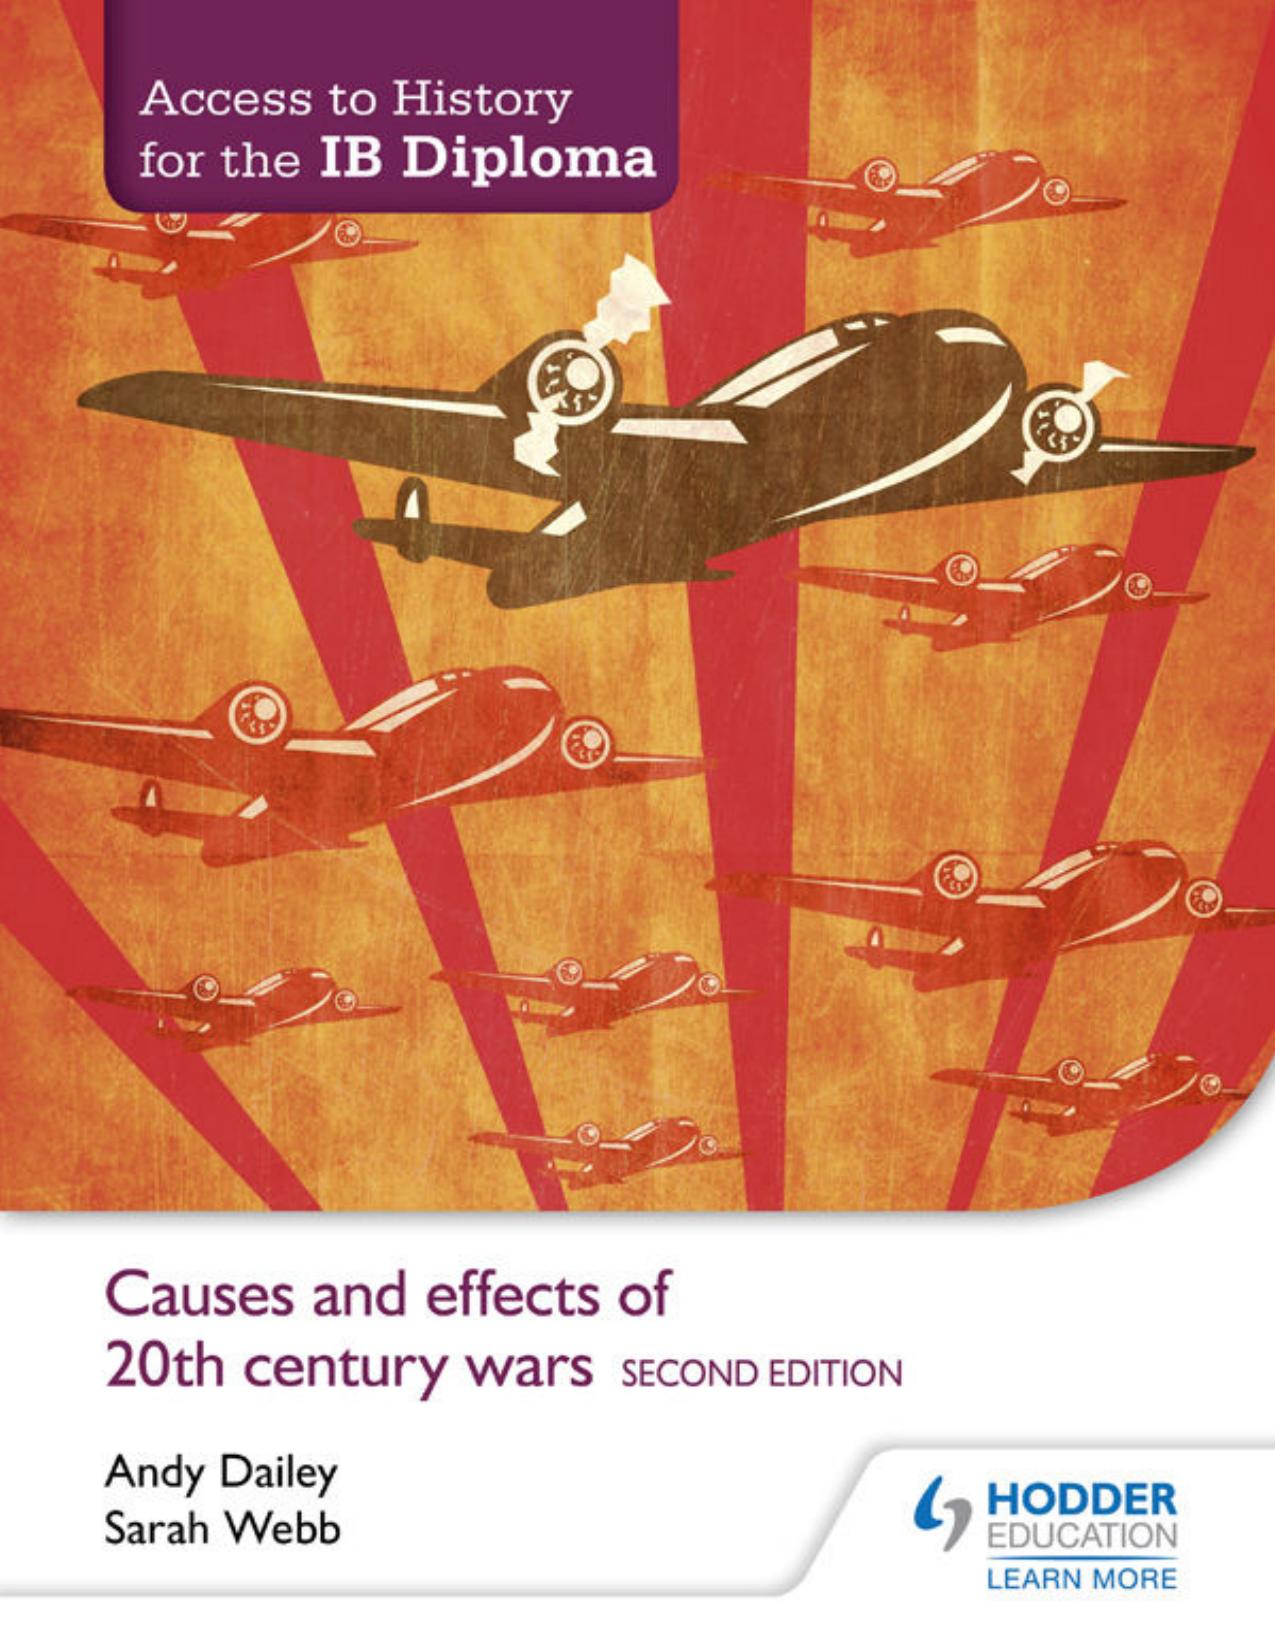 Access to History for the IB Diploma_ Causes and effects of 20th-century wars Second Edition.jpg